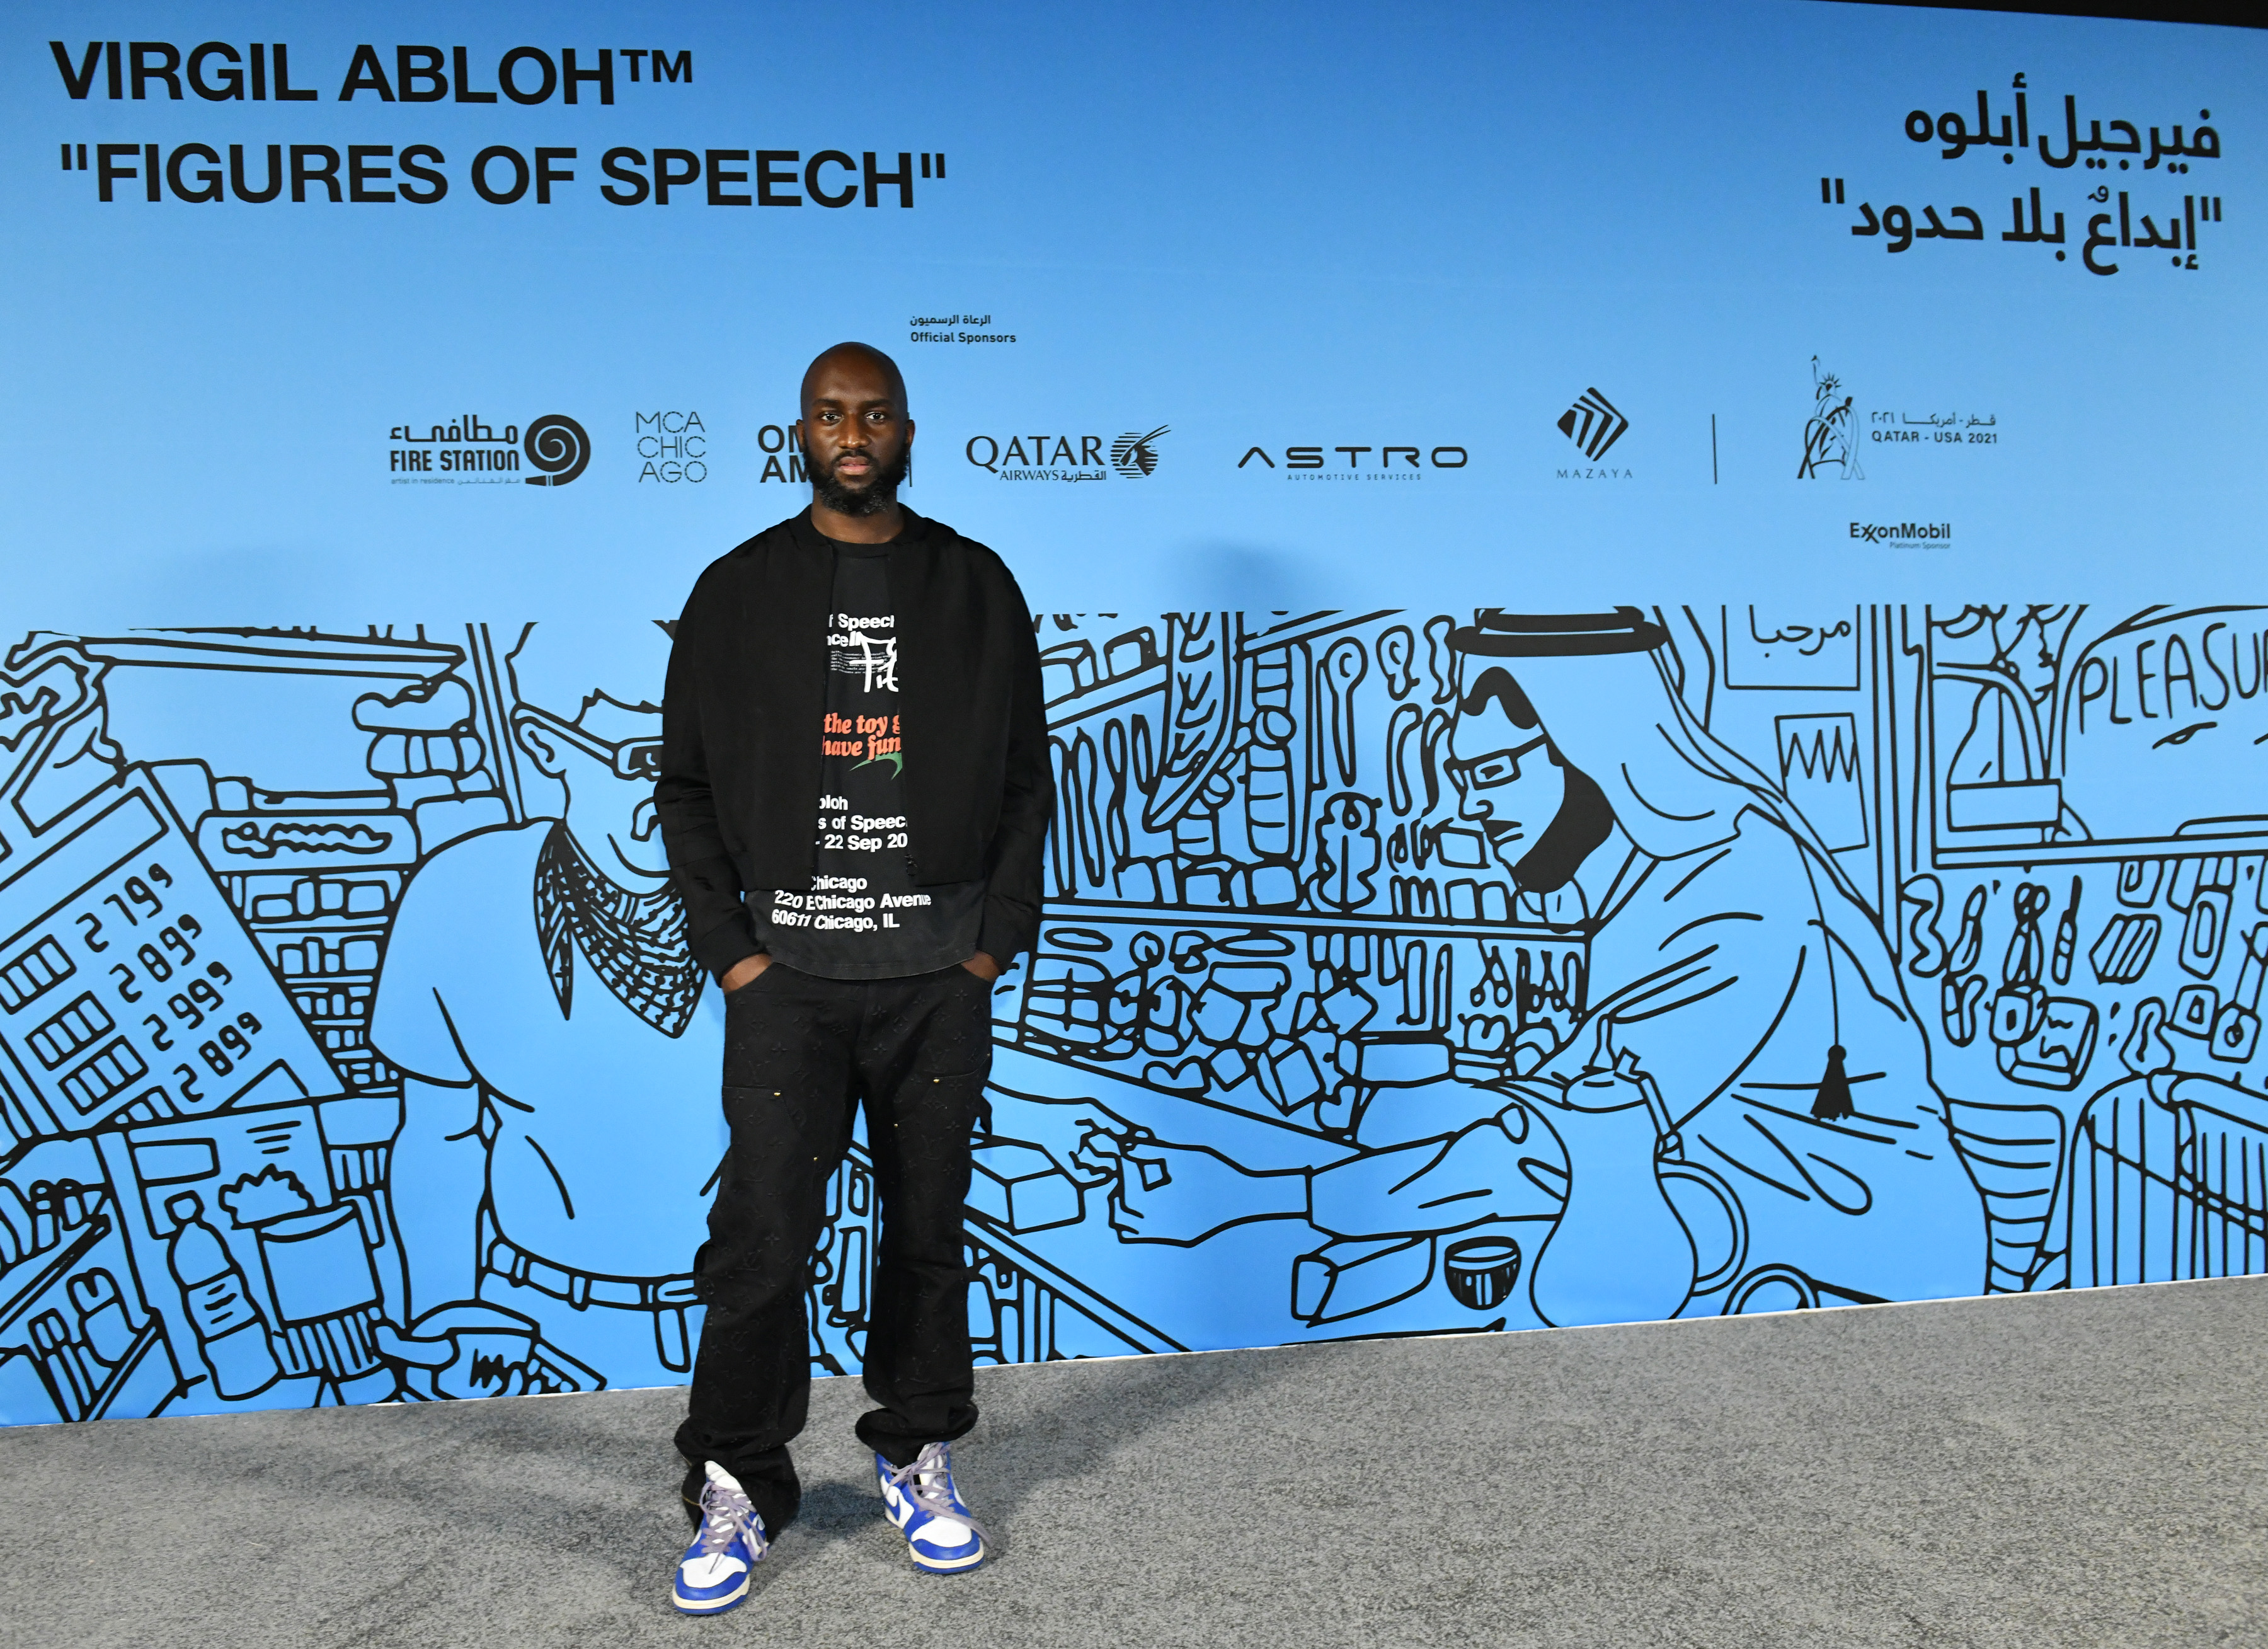 Louis Vuitton Celebrates Life Of Virgil Abloh With Virgil Was Here Video  & Announces Final Tribute Show In Miami